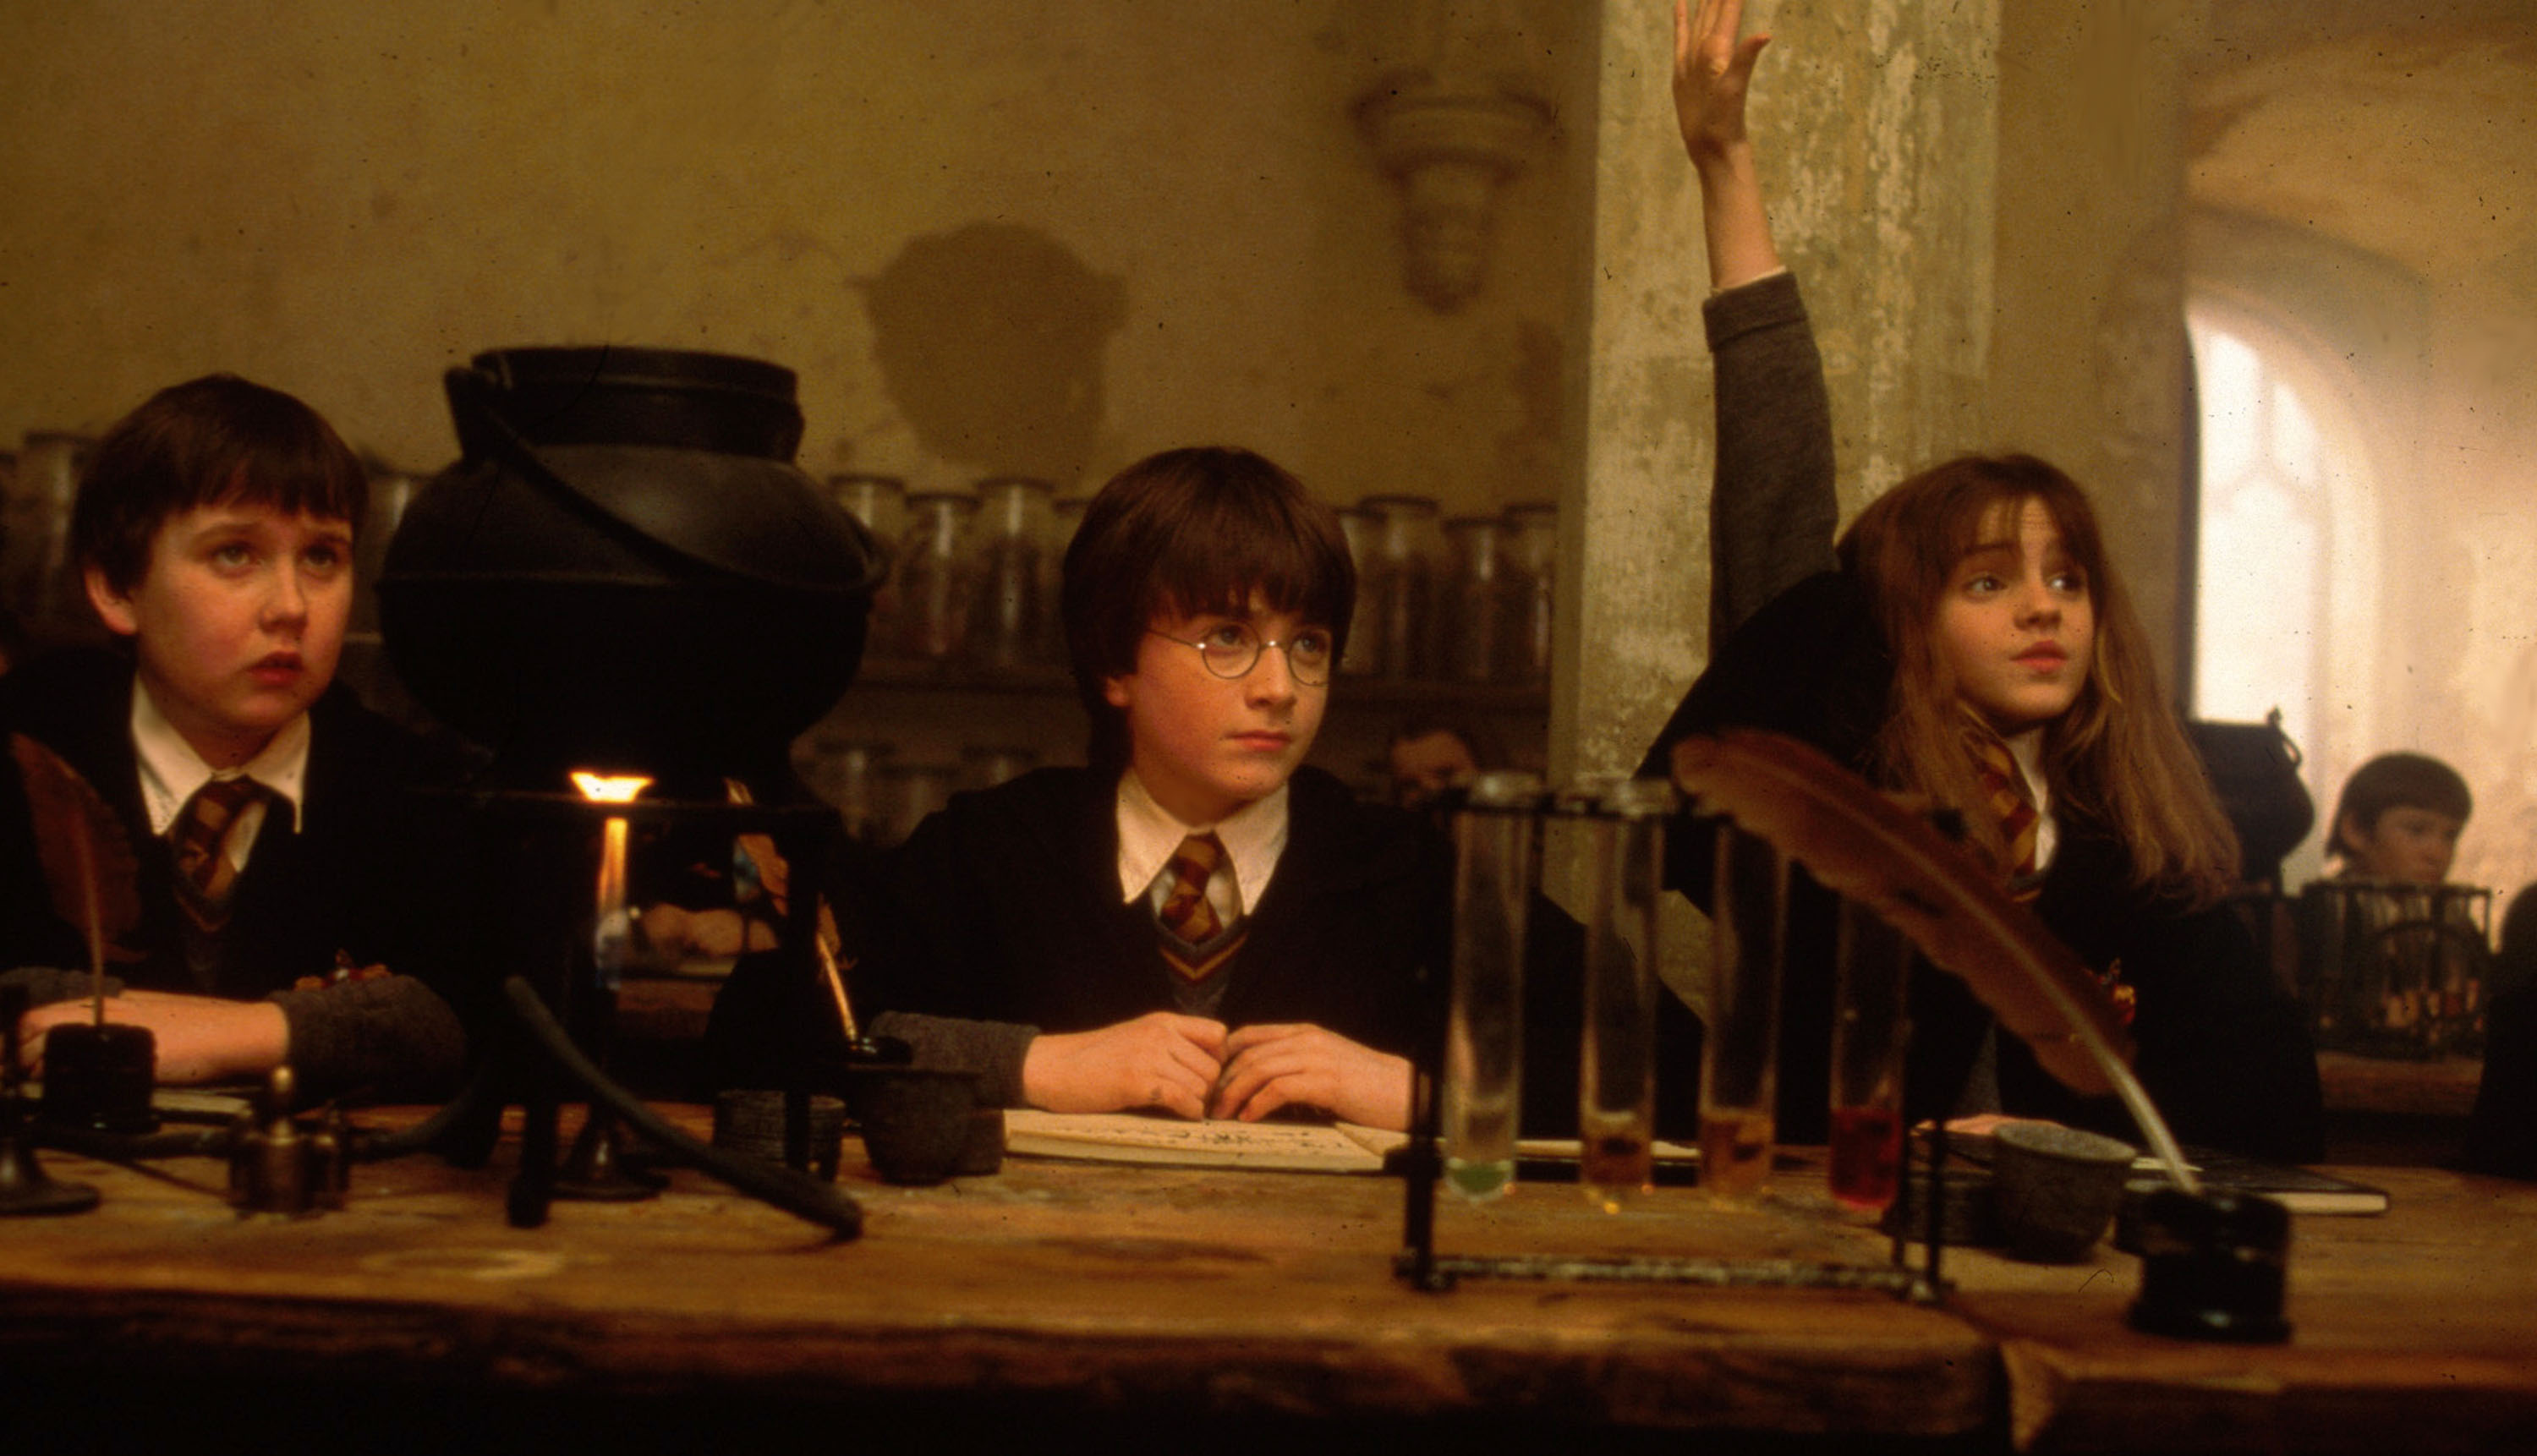 Daniel Radcliffe in Harry Potter and the Sorcerer's Stone (Warner Bros.)